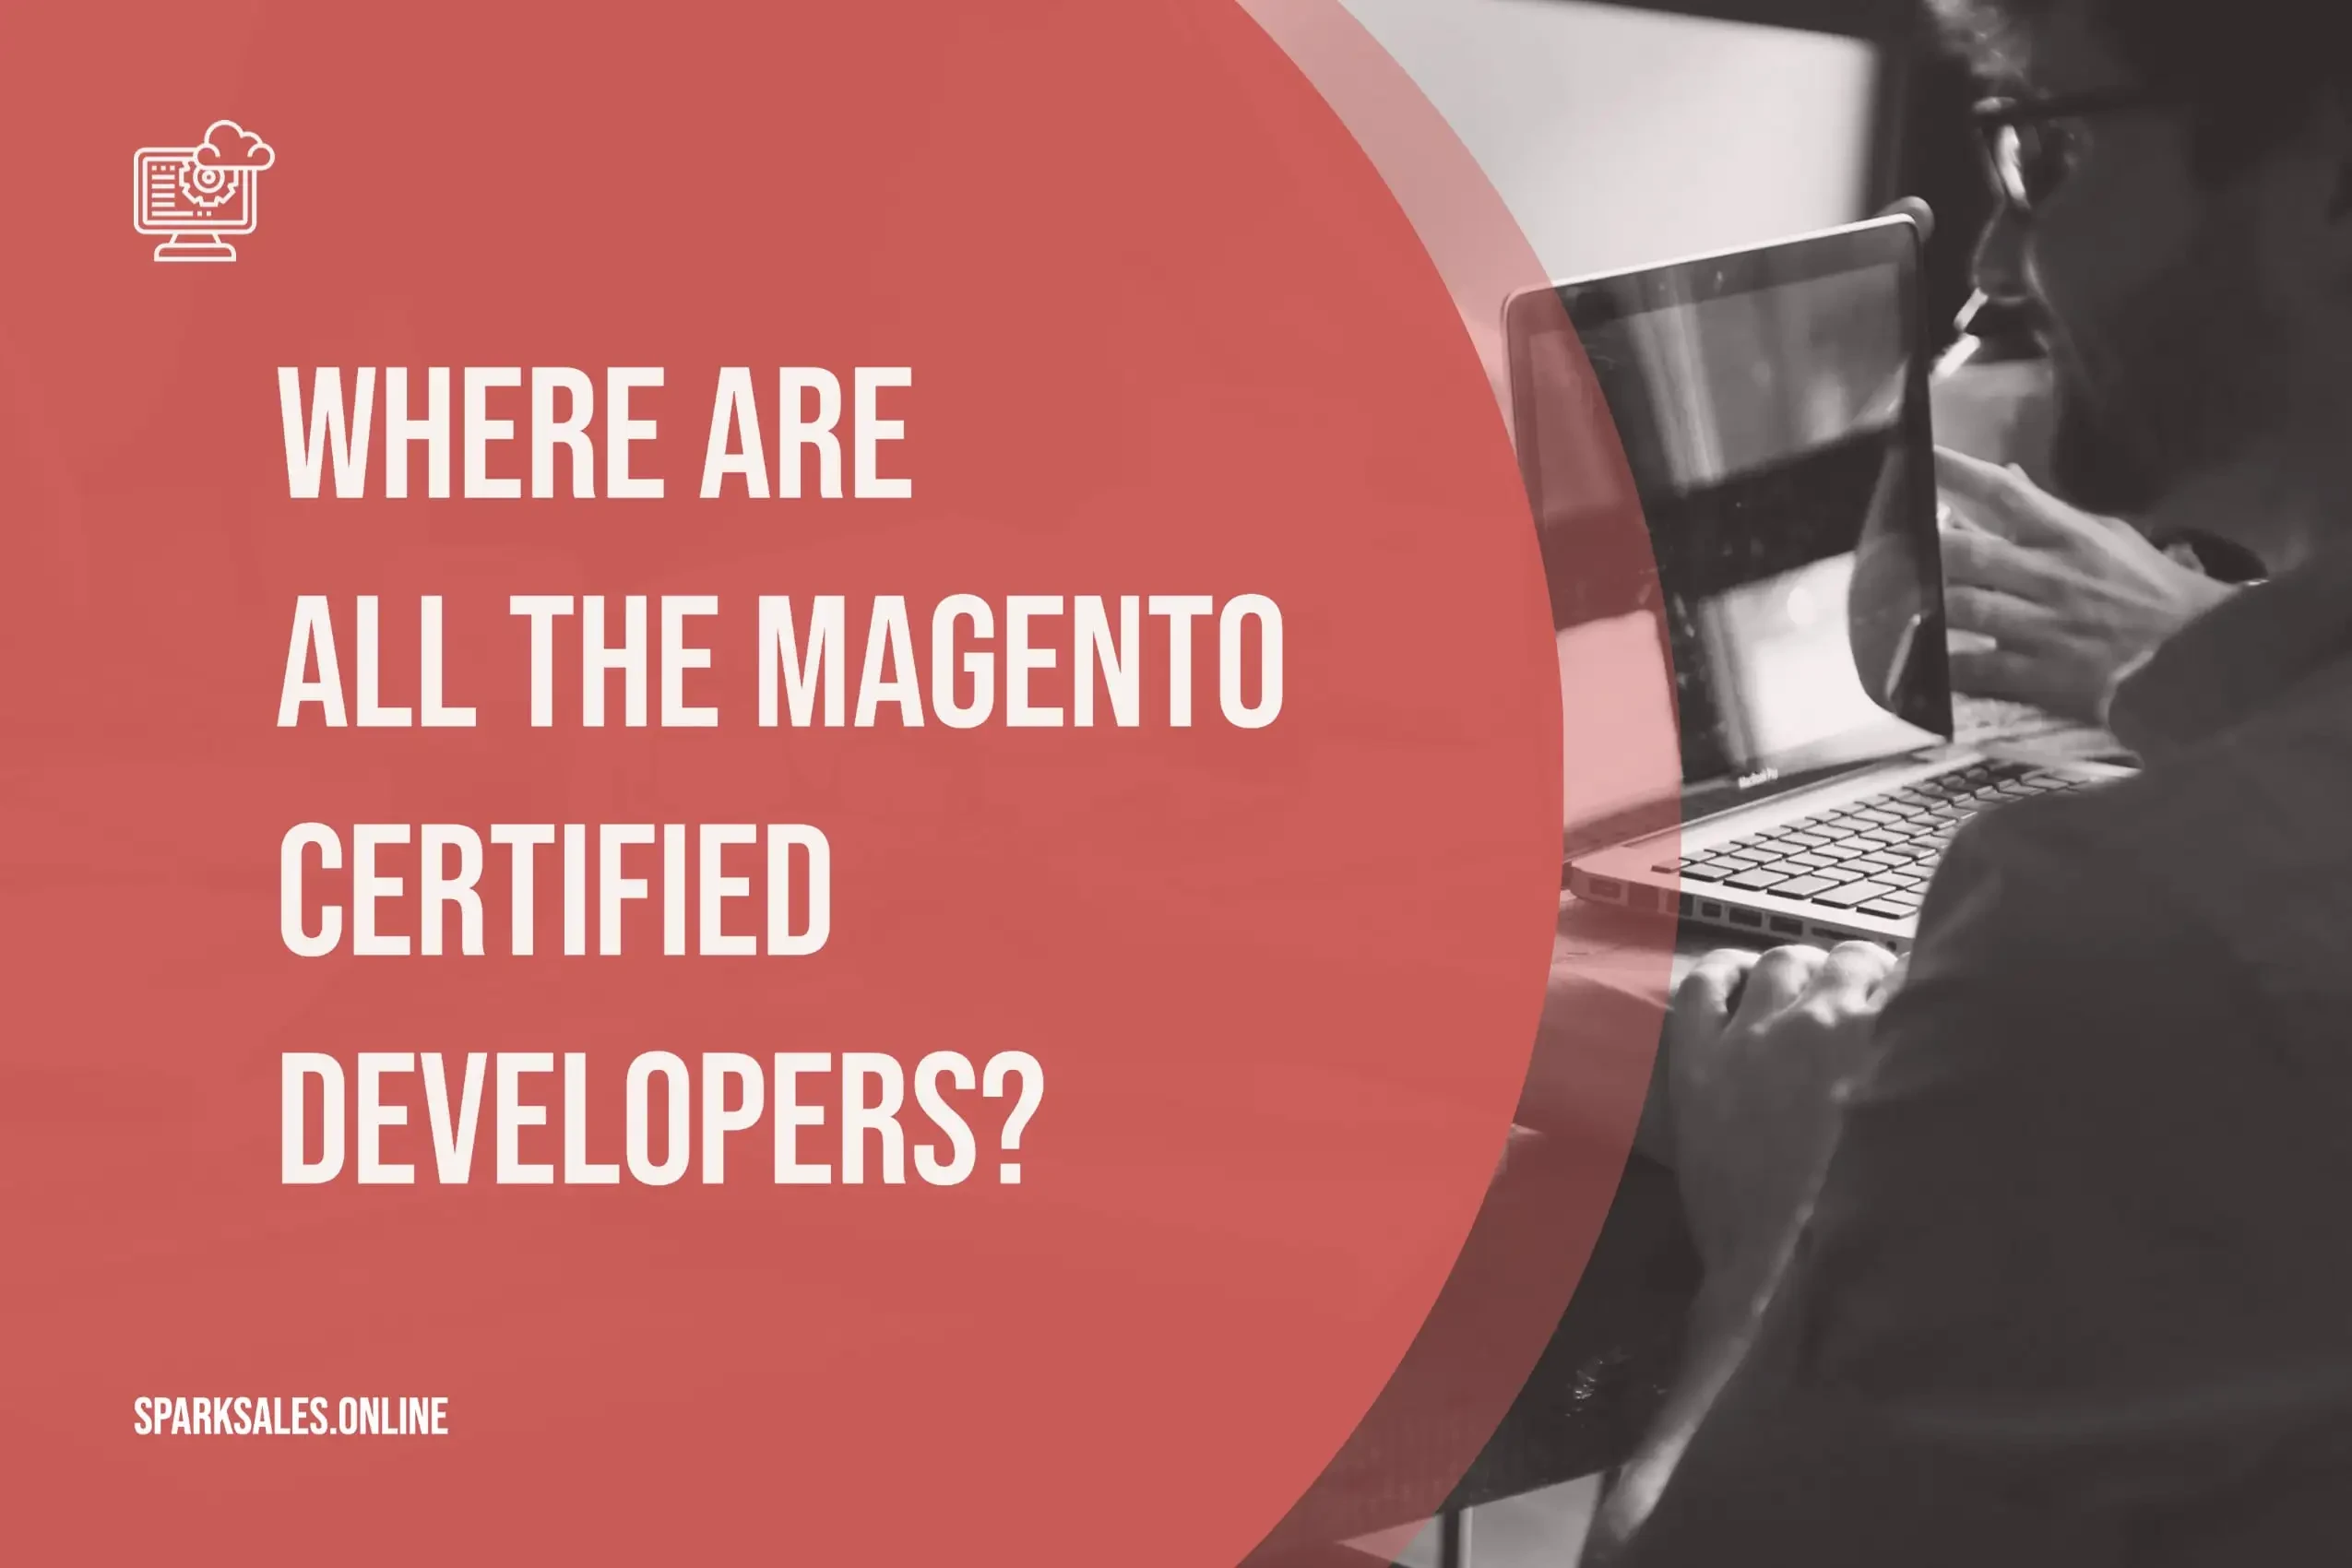 Where Are All the Magento Certified Developers?